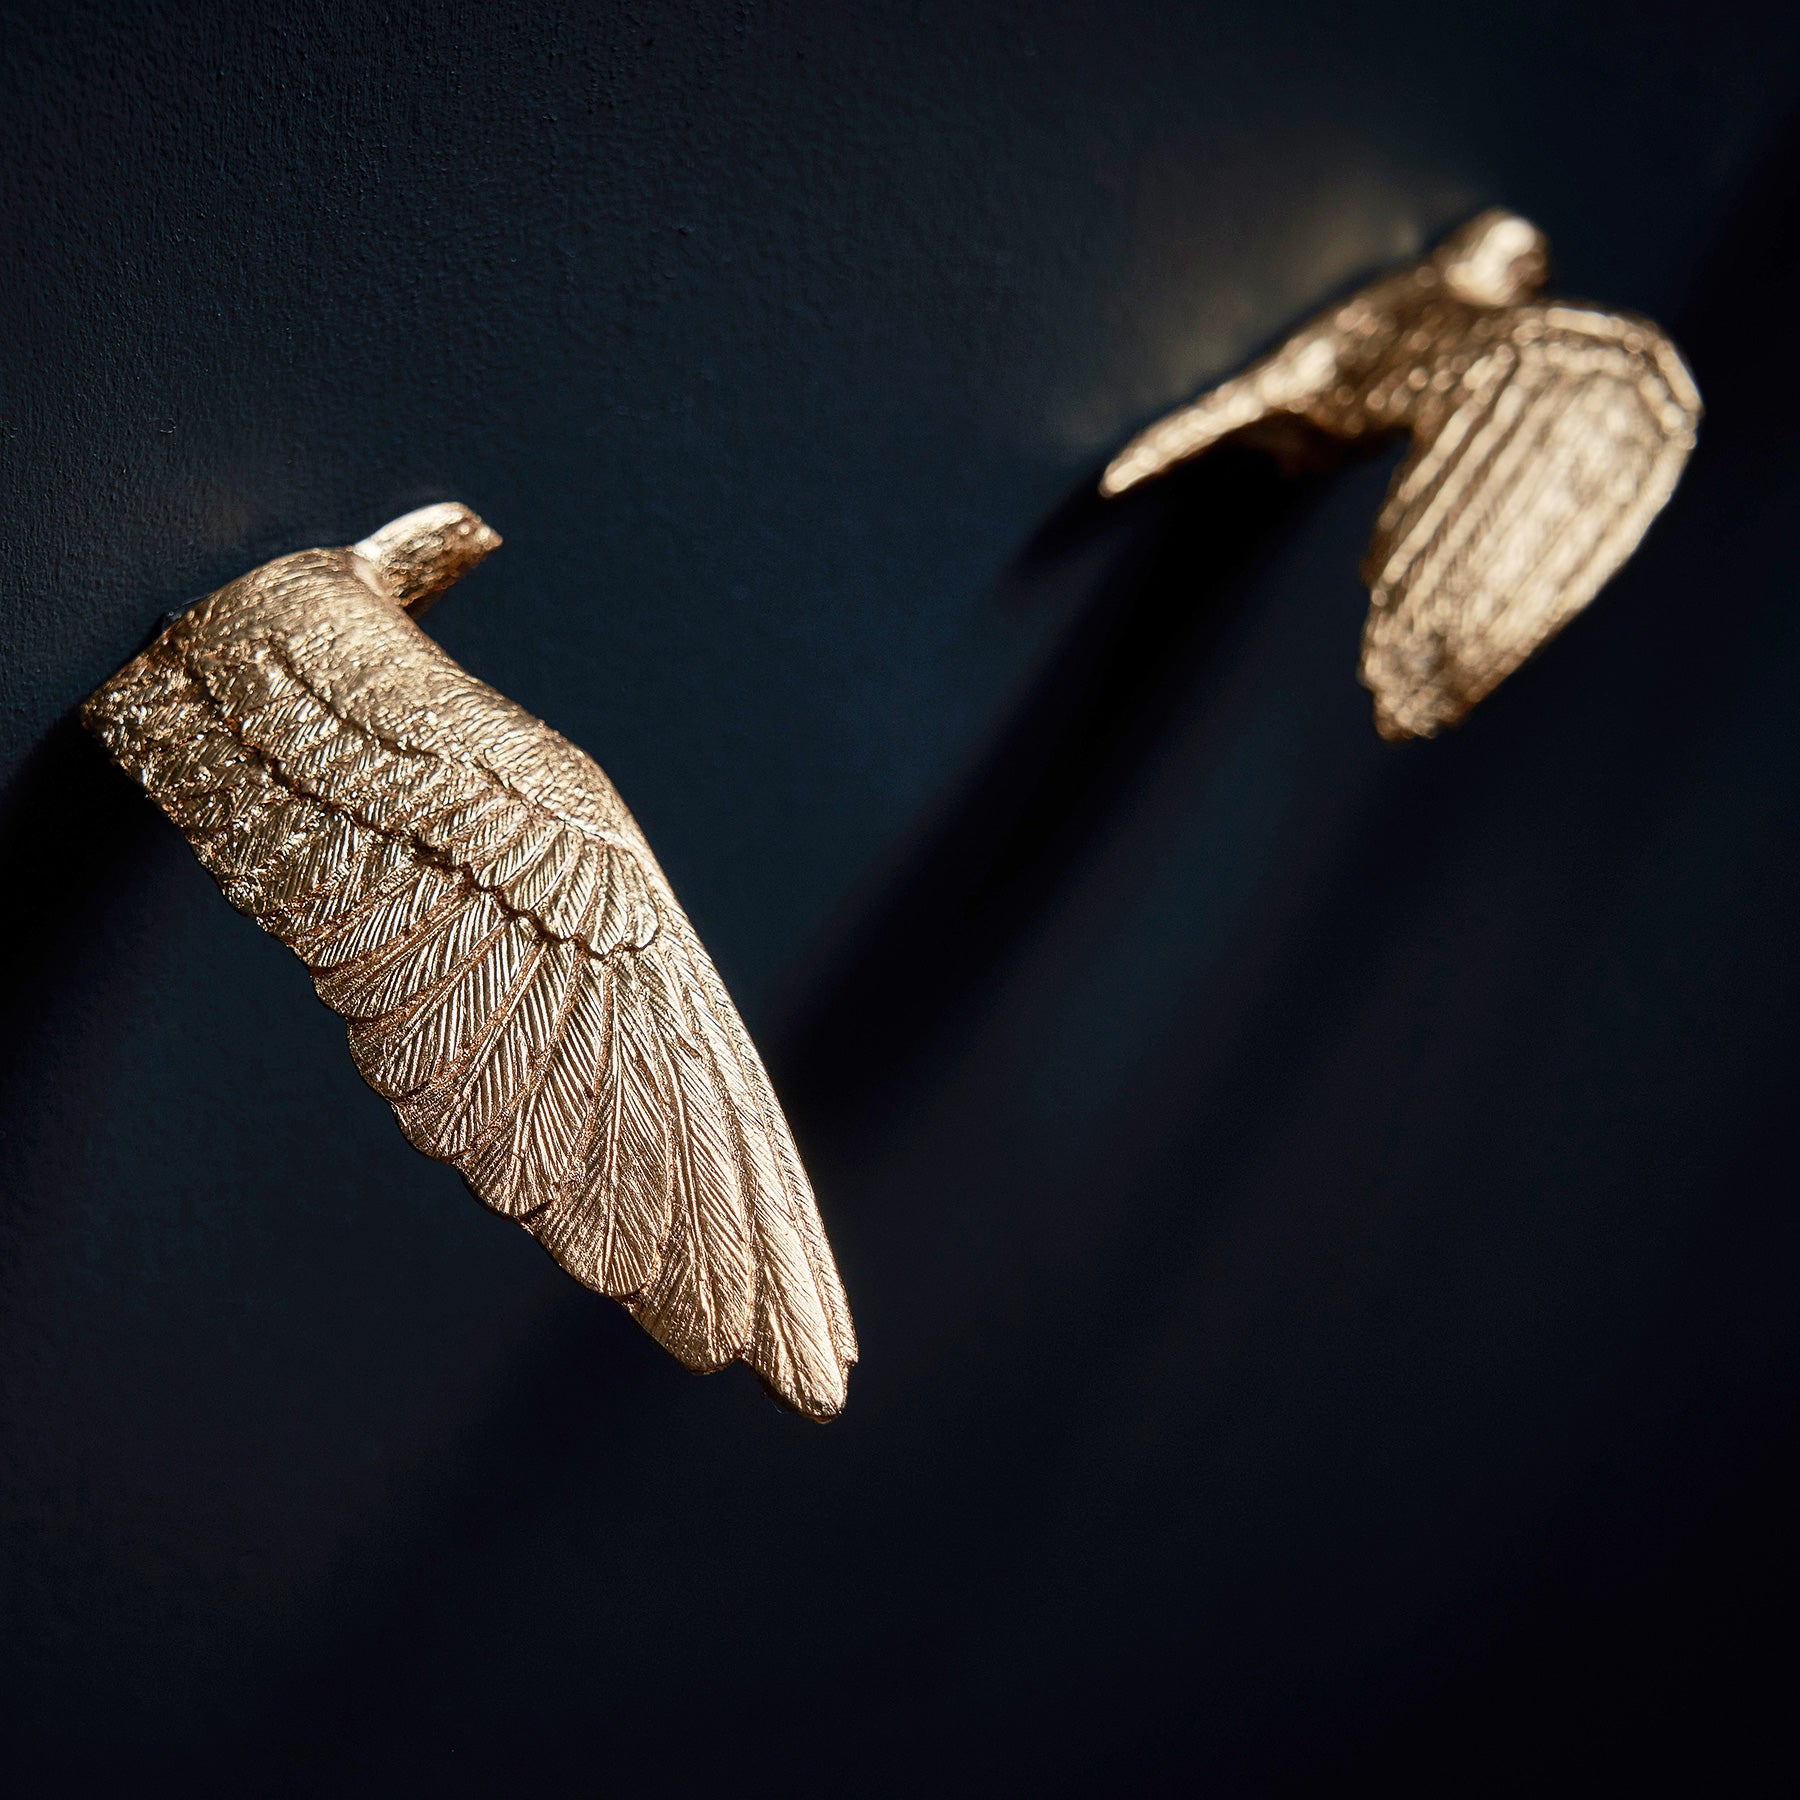 Contemporary and Modern Gold Wall Clock with Swallow Bird Sculpture